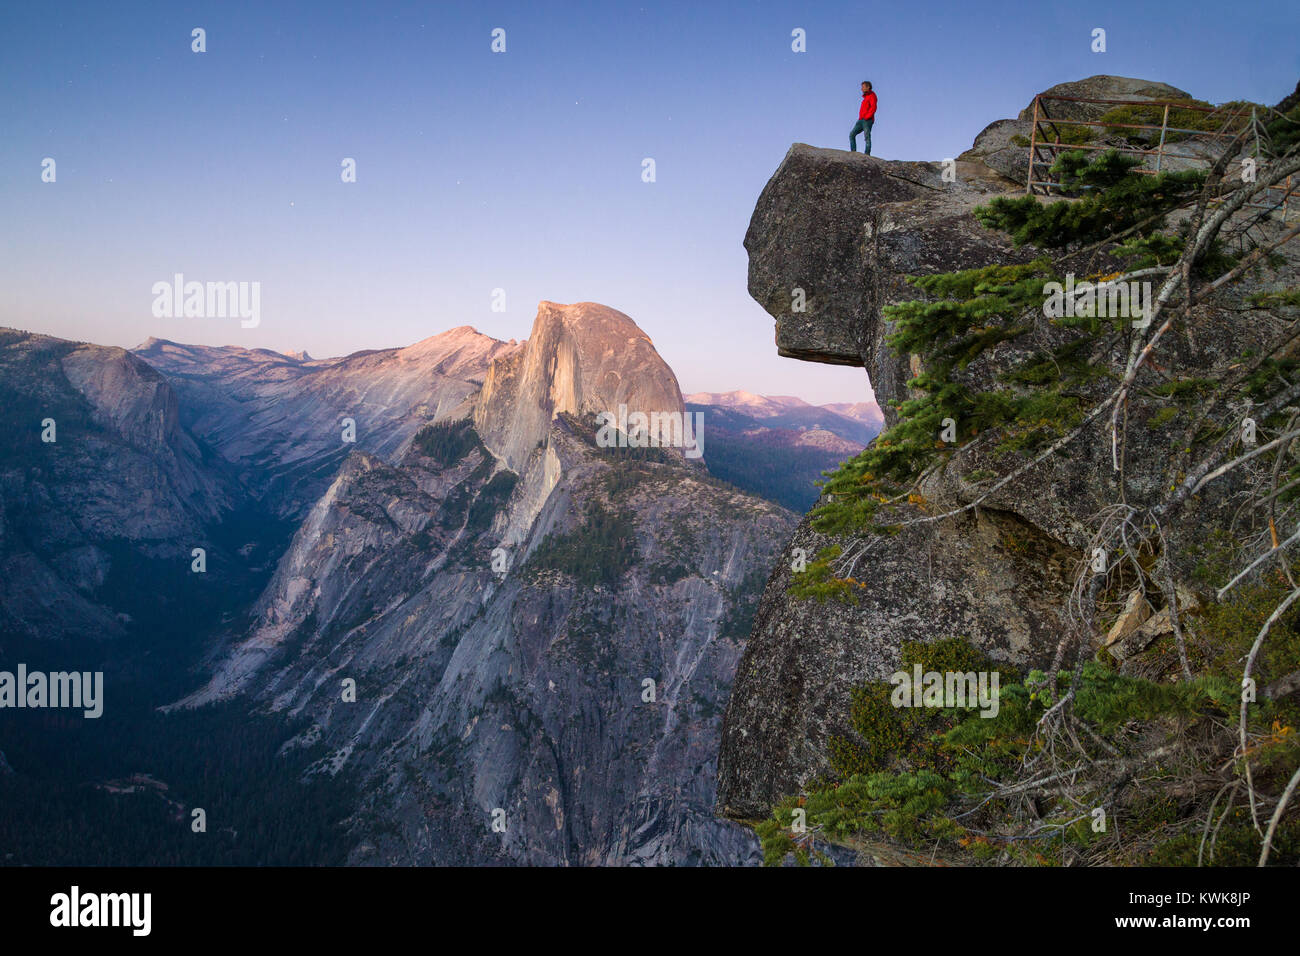 A fearless hiker is standing on an overhanging rock looking towards famous Half Dome at Glacier Point at sunset, Yosemite National Park, California Stock Photo